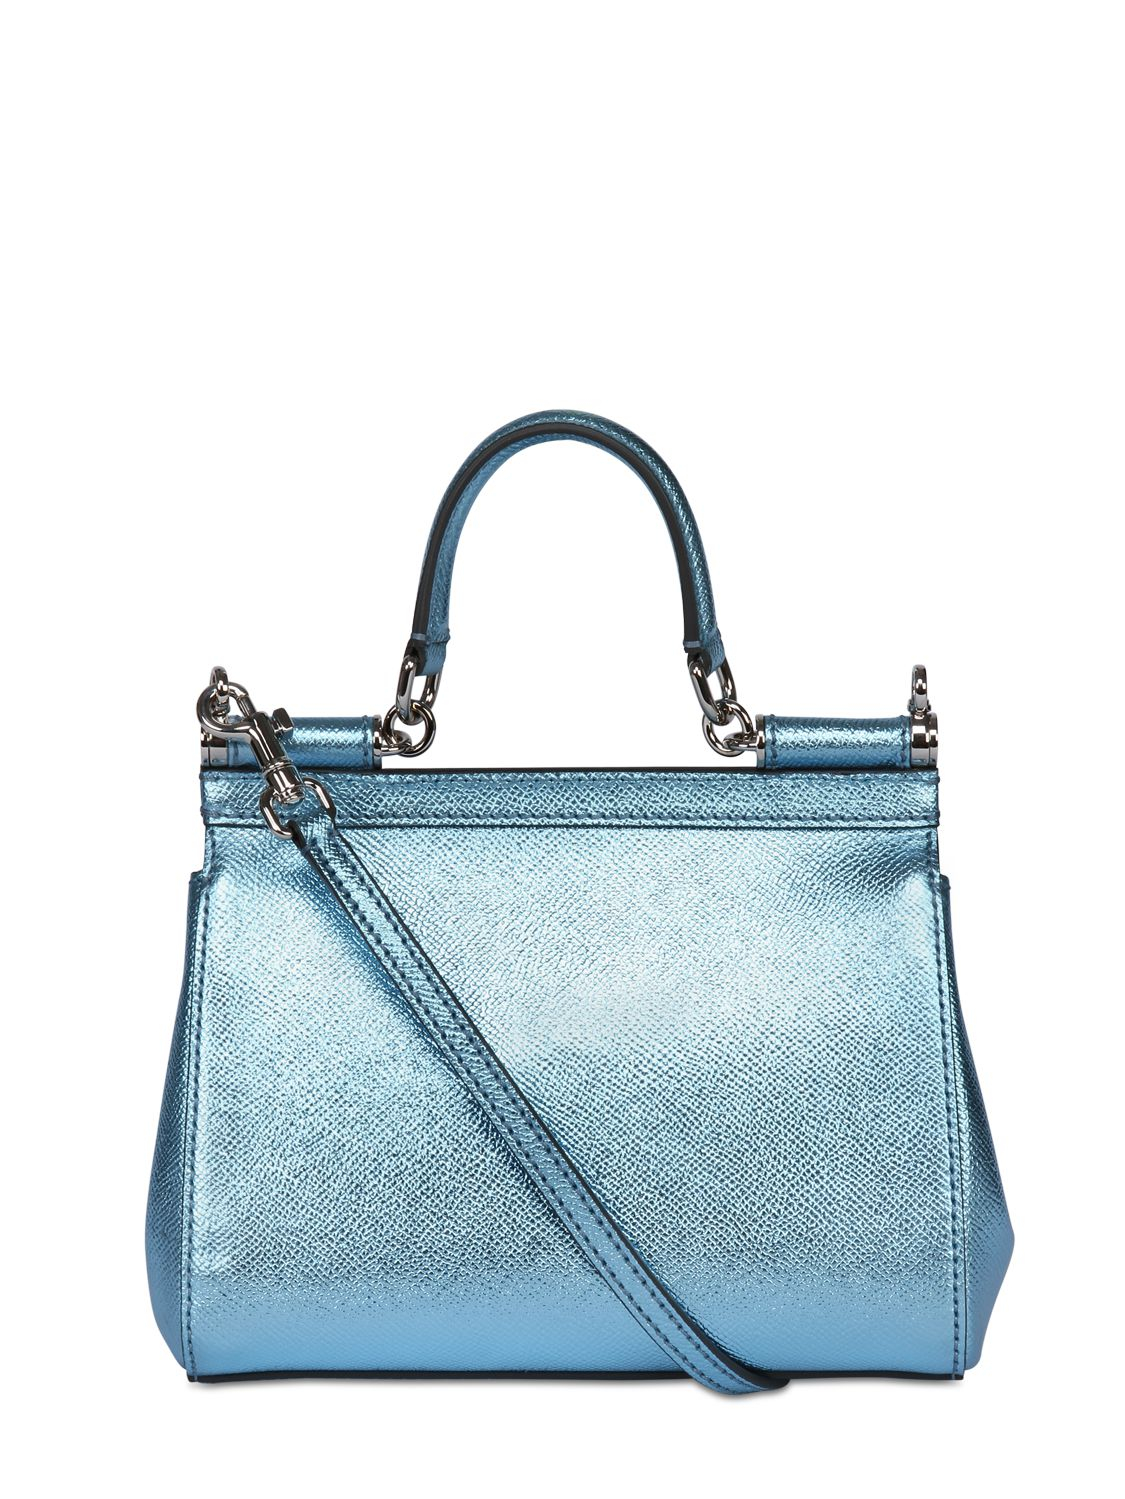 Lyst - Dolce & Gabbana Small Sicily Lamé Dauphine Leather Bag in Blue